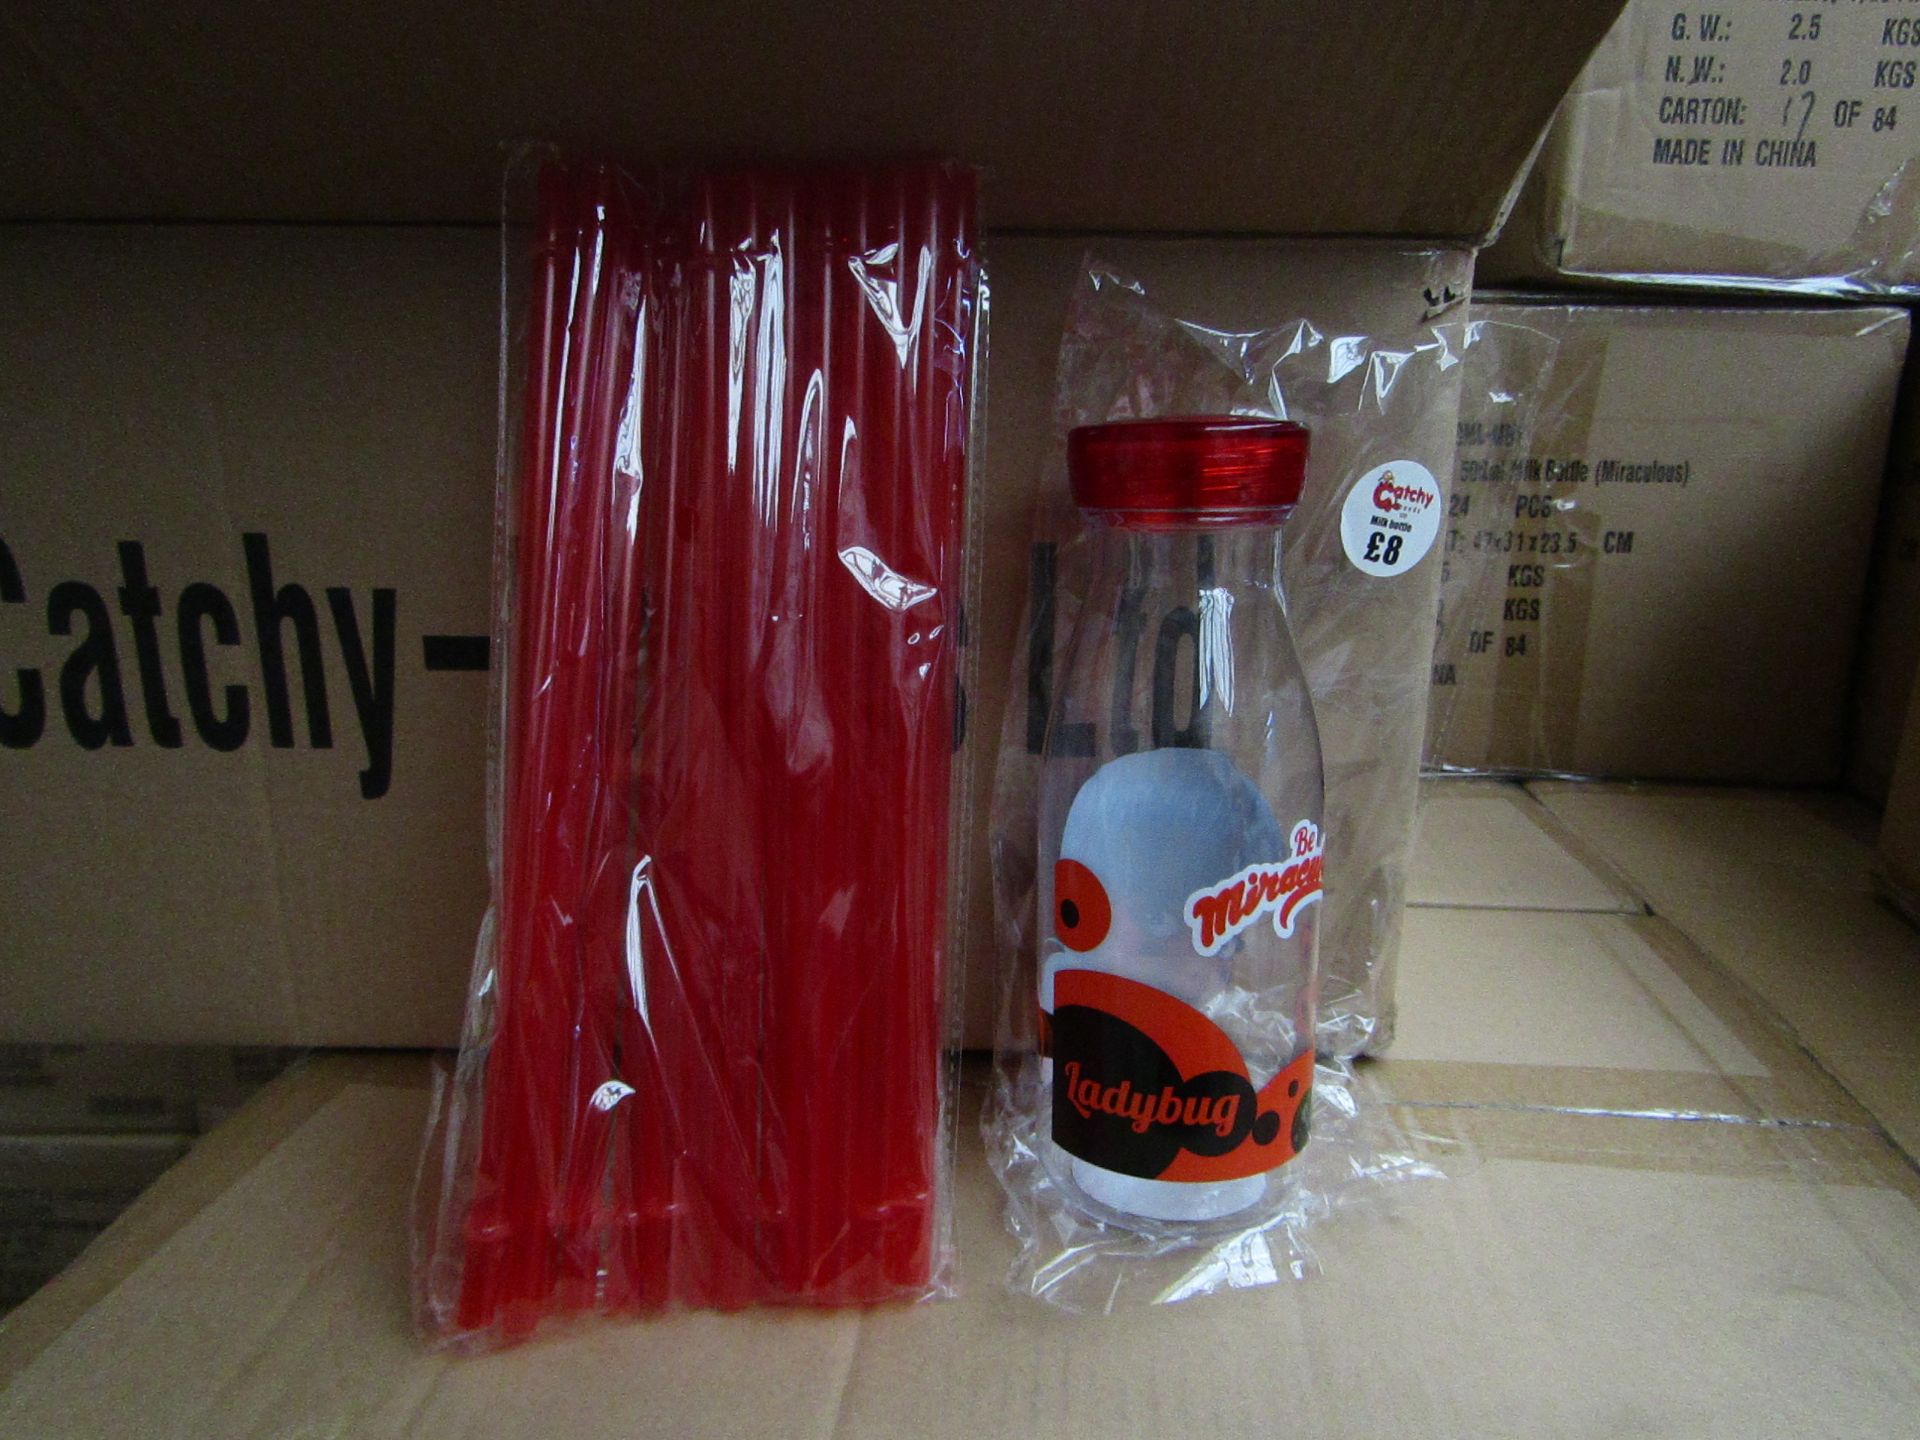 24 x Be Miraculous Lady Bug Milk Bottles with Straws. RRP £8 each New & Packaged